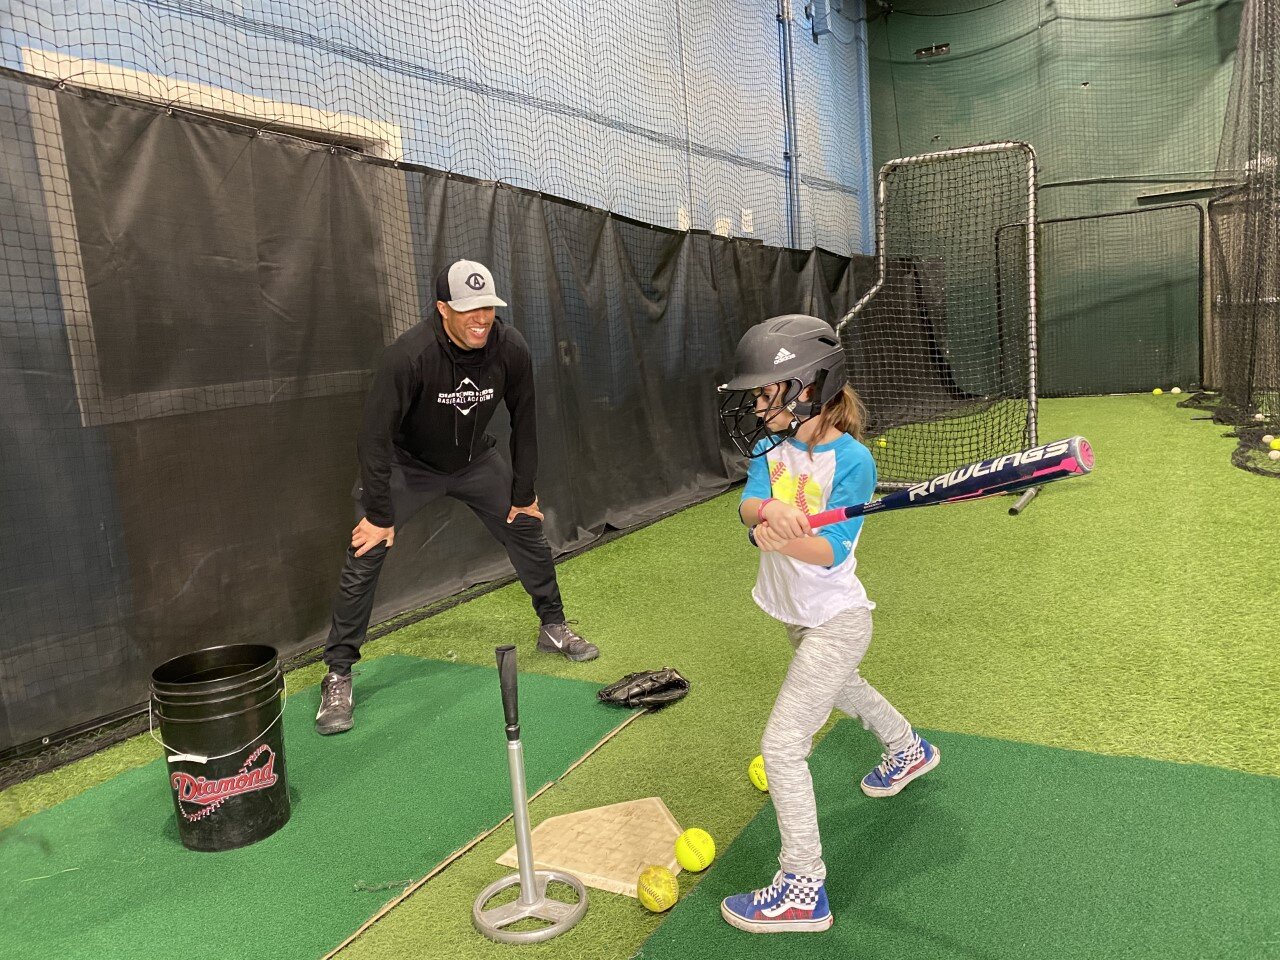 Hitting Lessons, Pitching Lessons, Fielding Lessons — Diamond Kids Baseball Academy